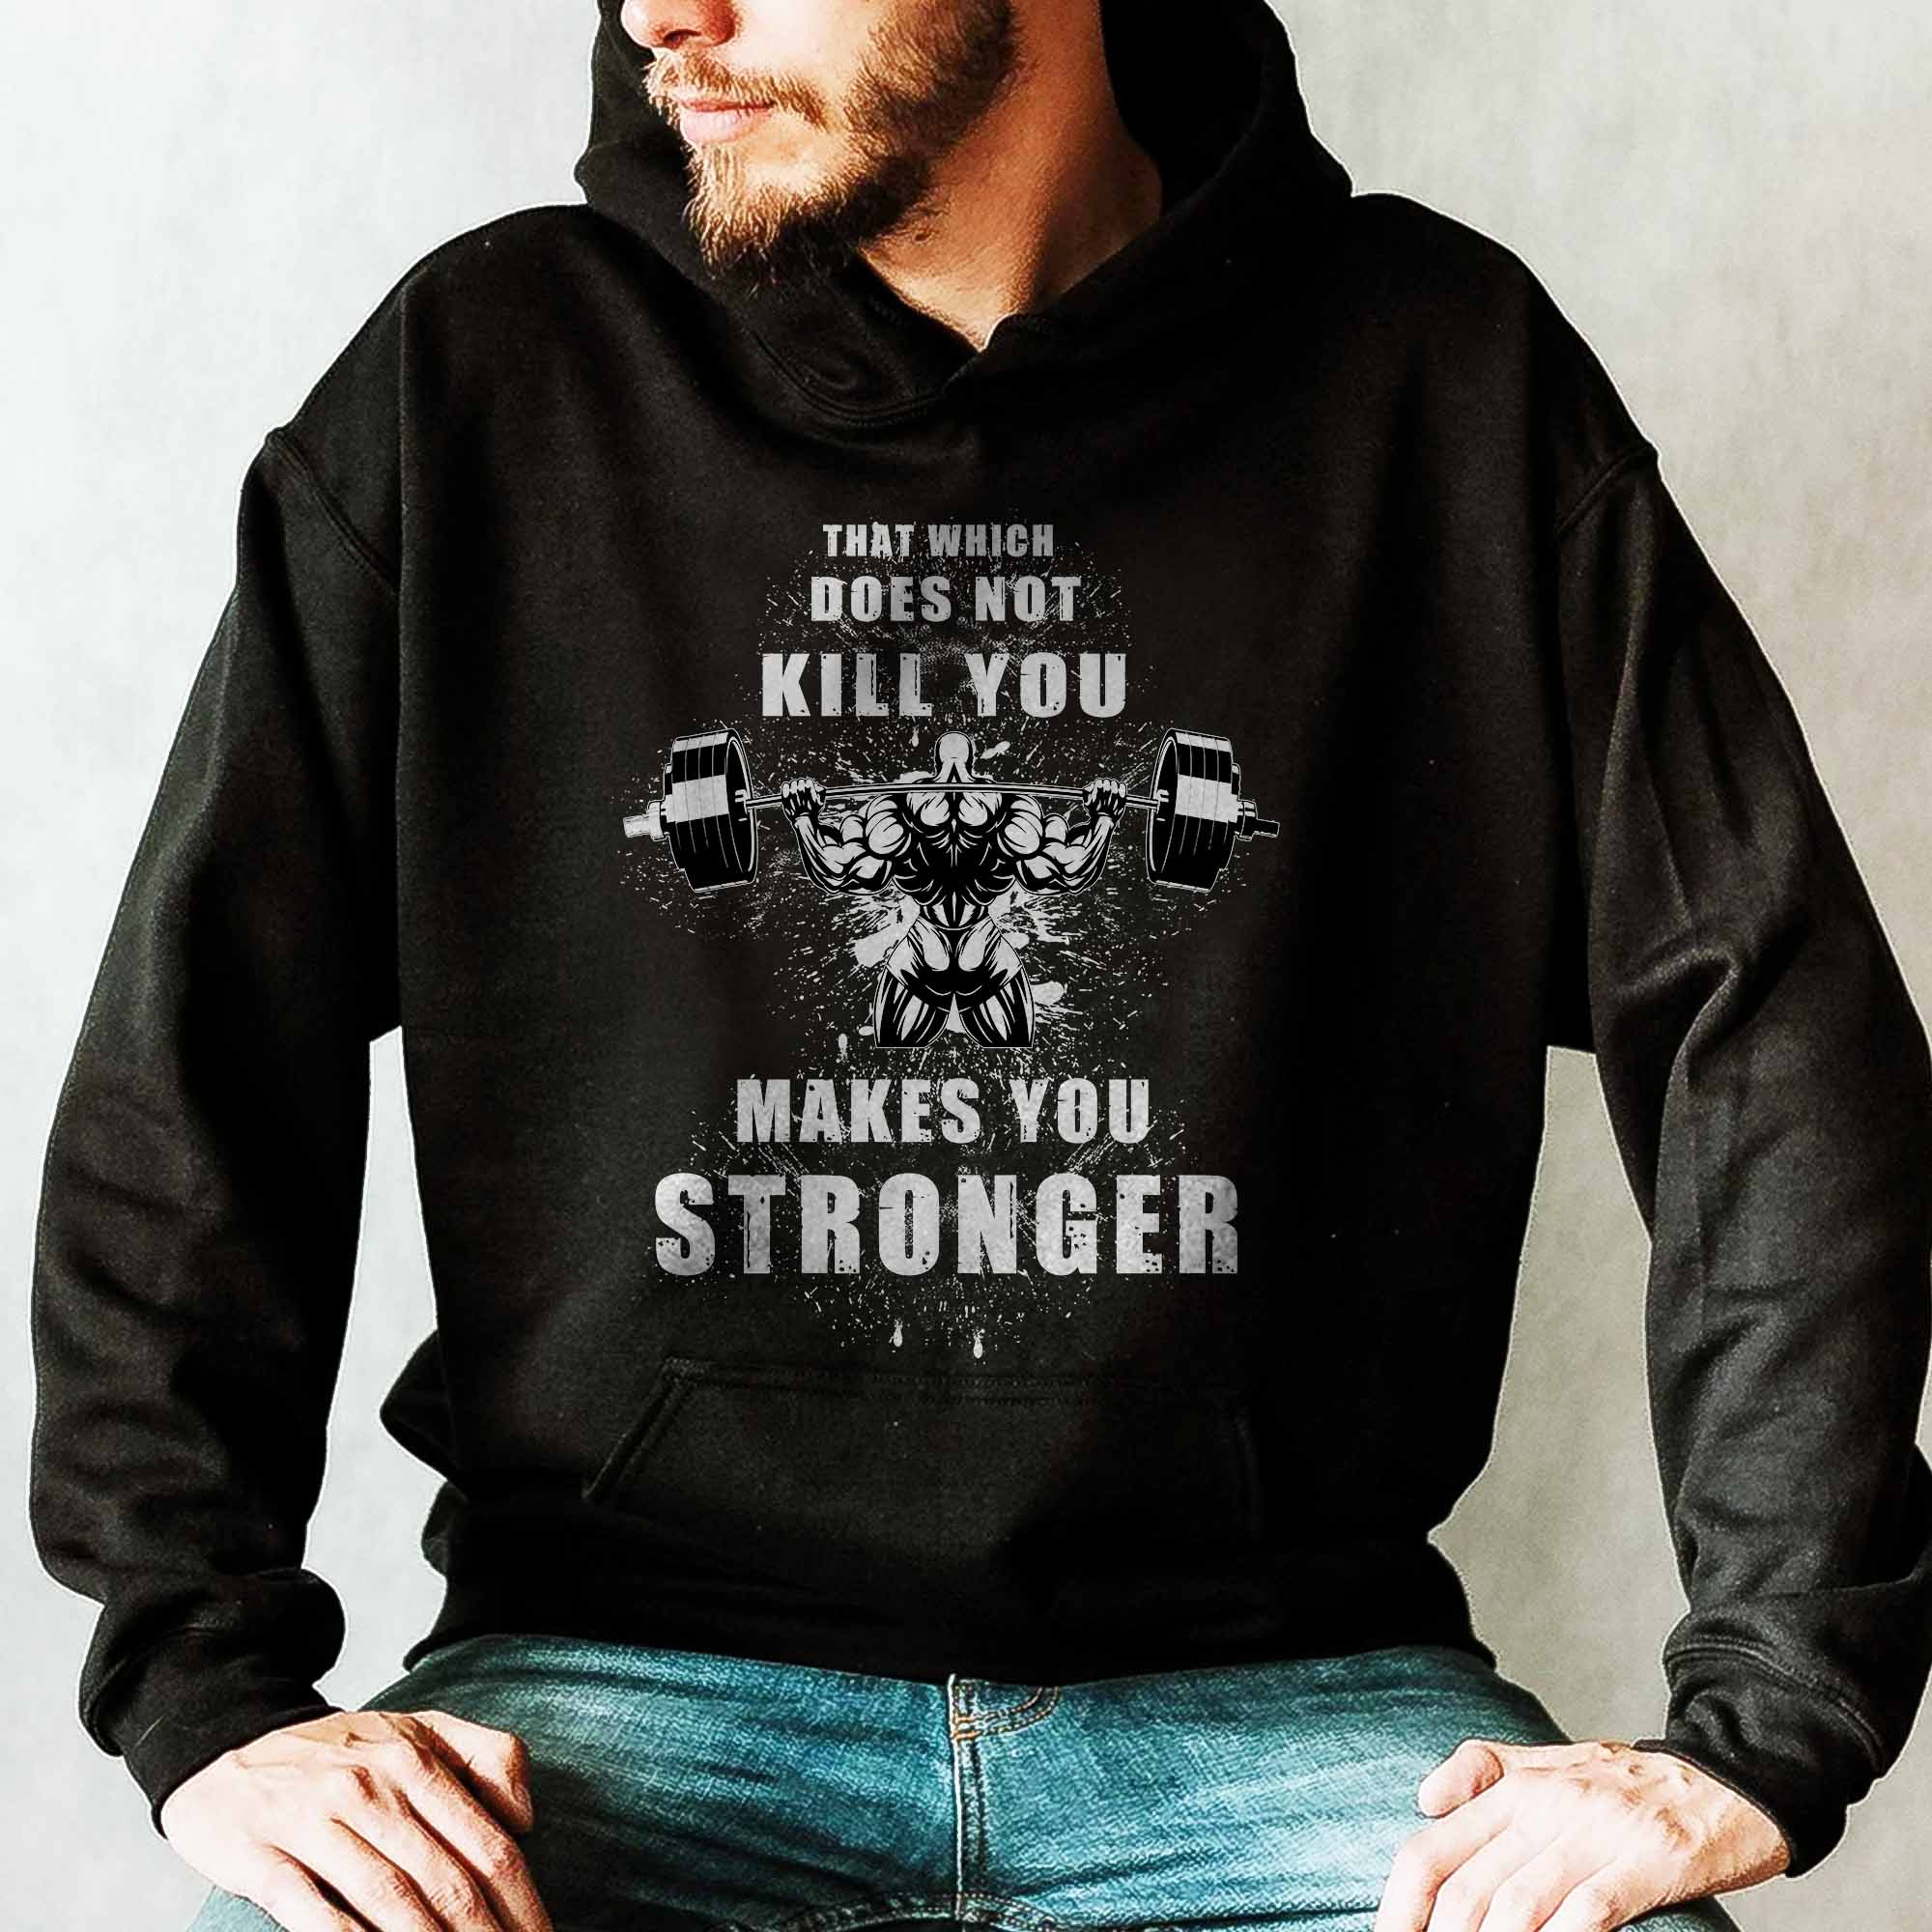 Gym Pump Cover Hoodie Weightlifting Motivation Quotes